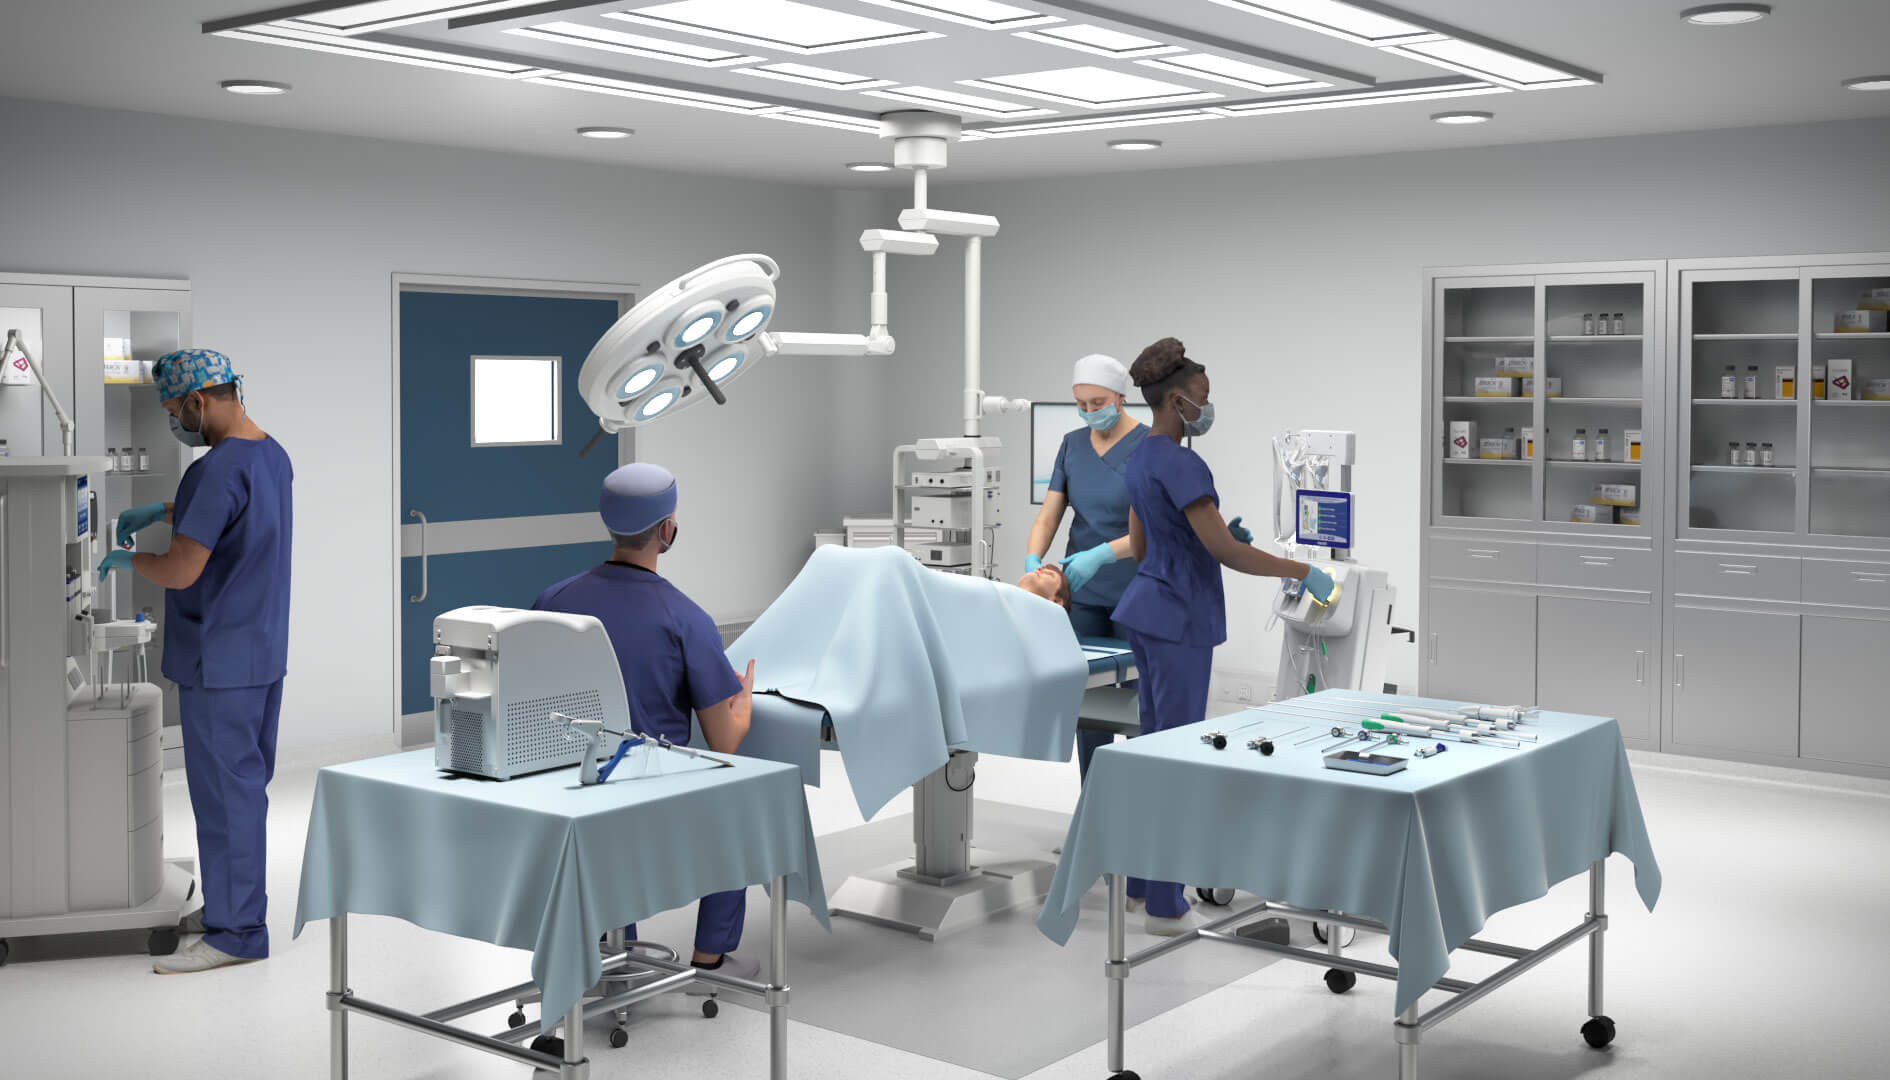 3D visual showing operating room, with three nurses and patient